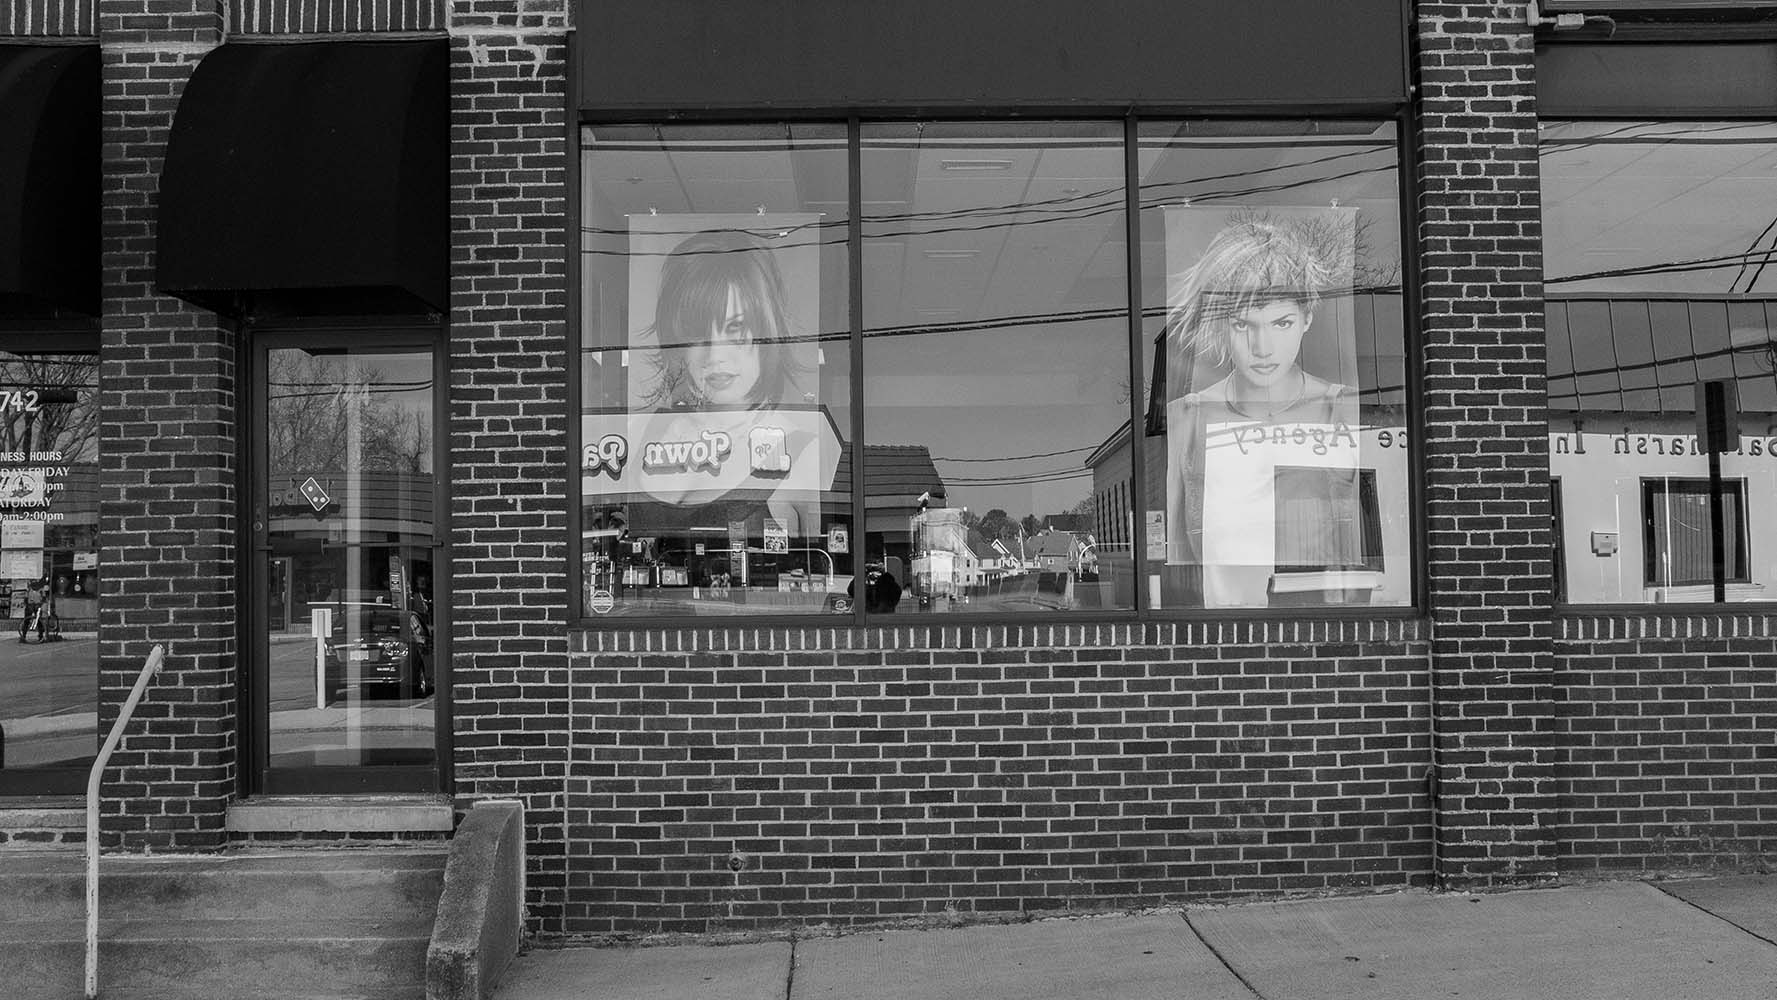 closed haircut shop window in black and white